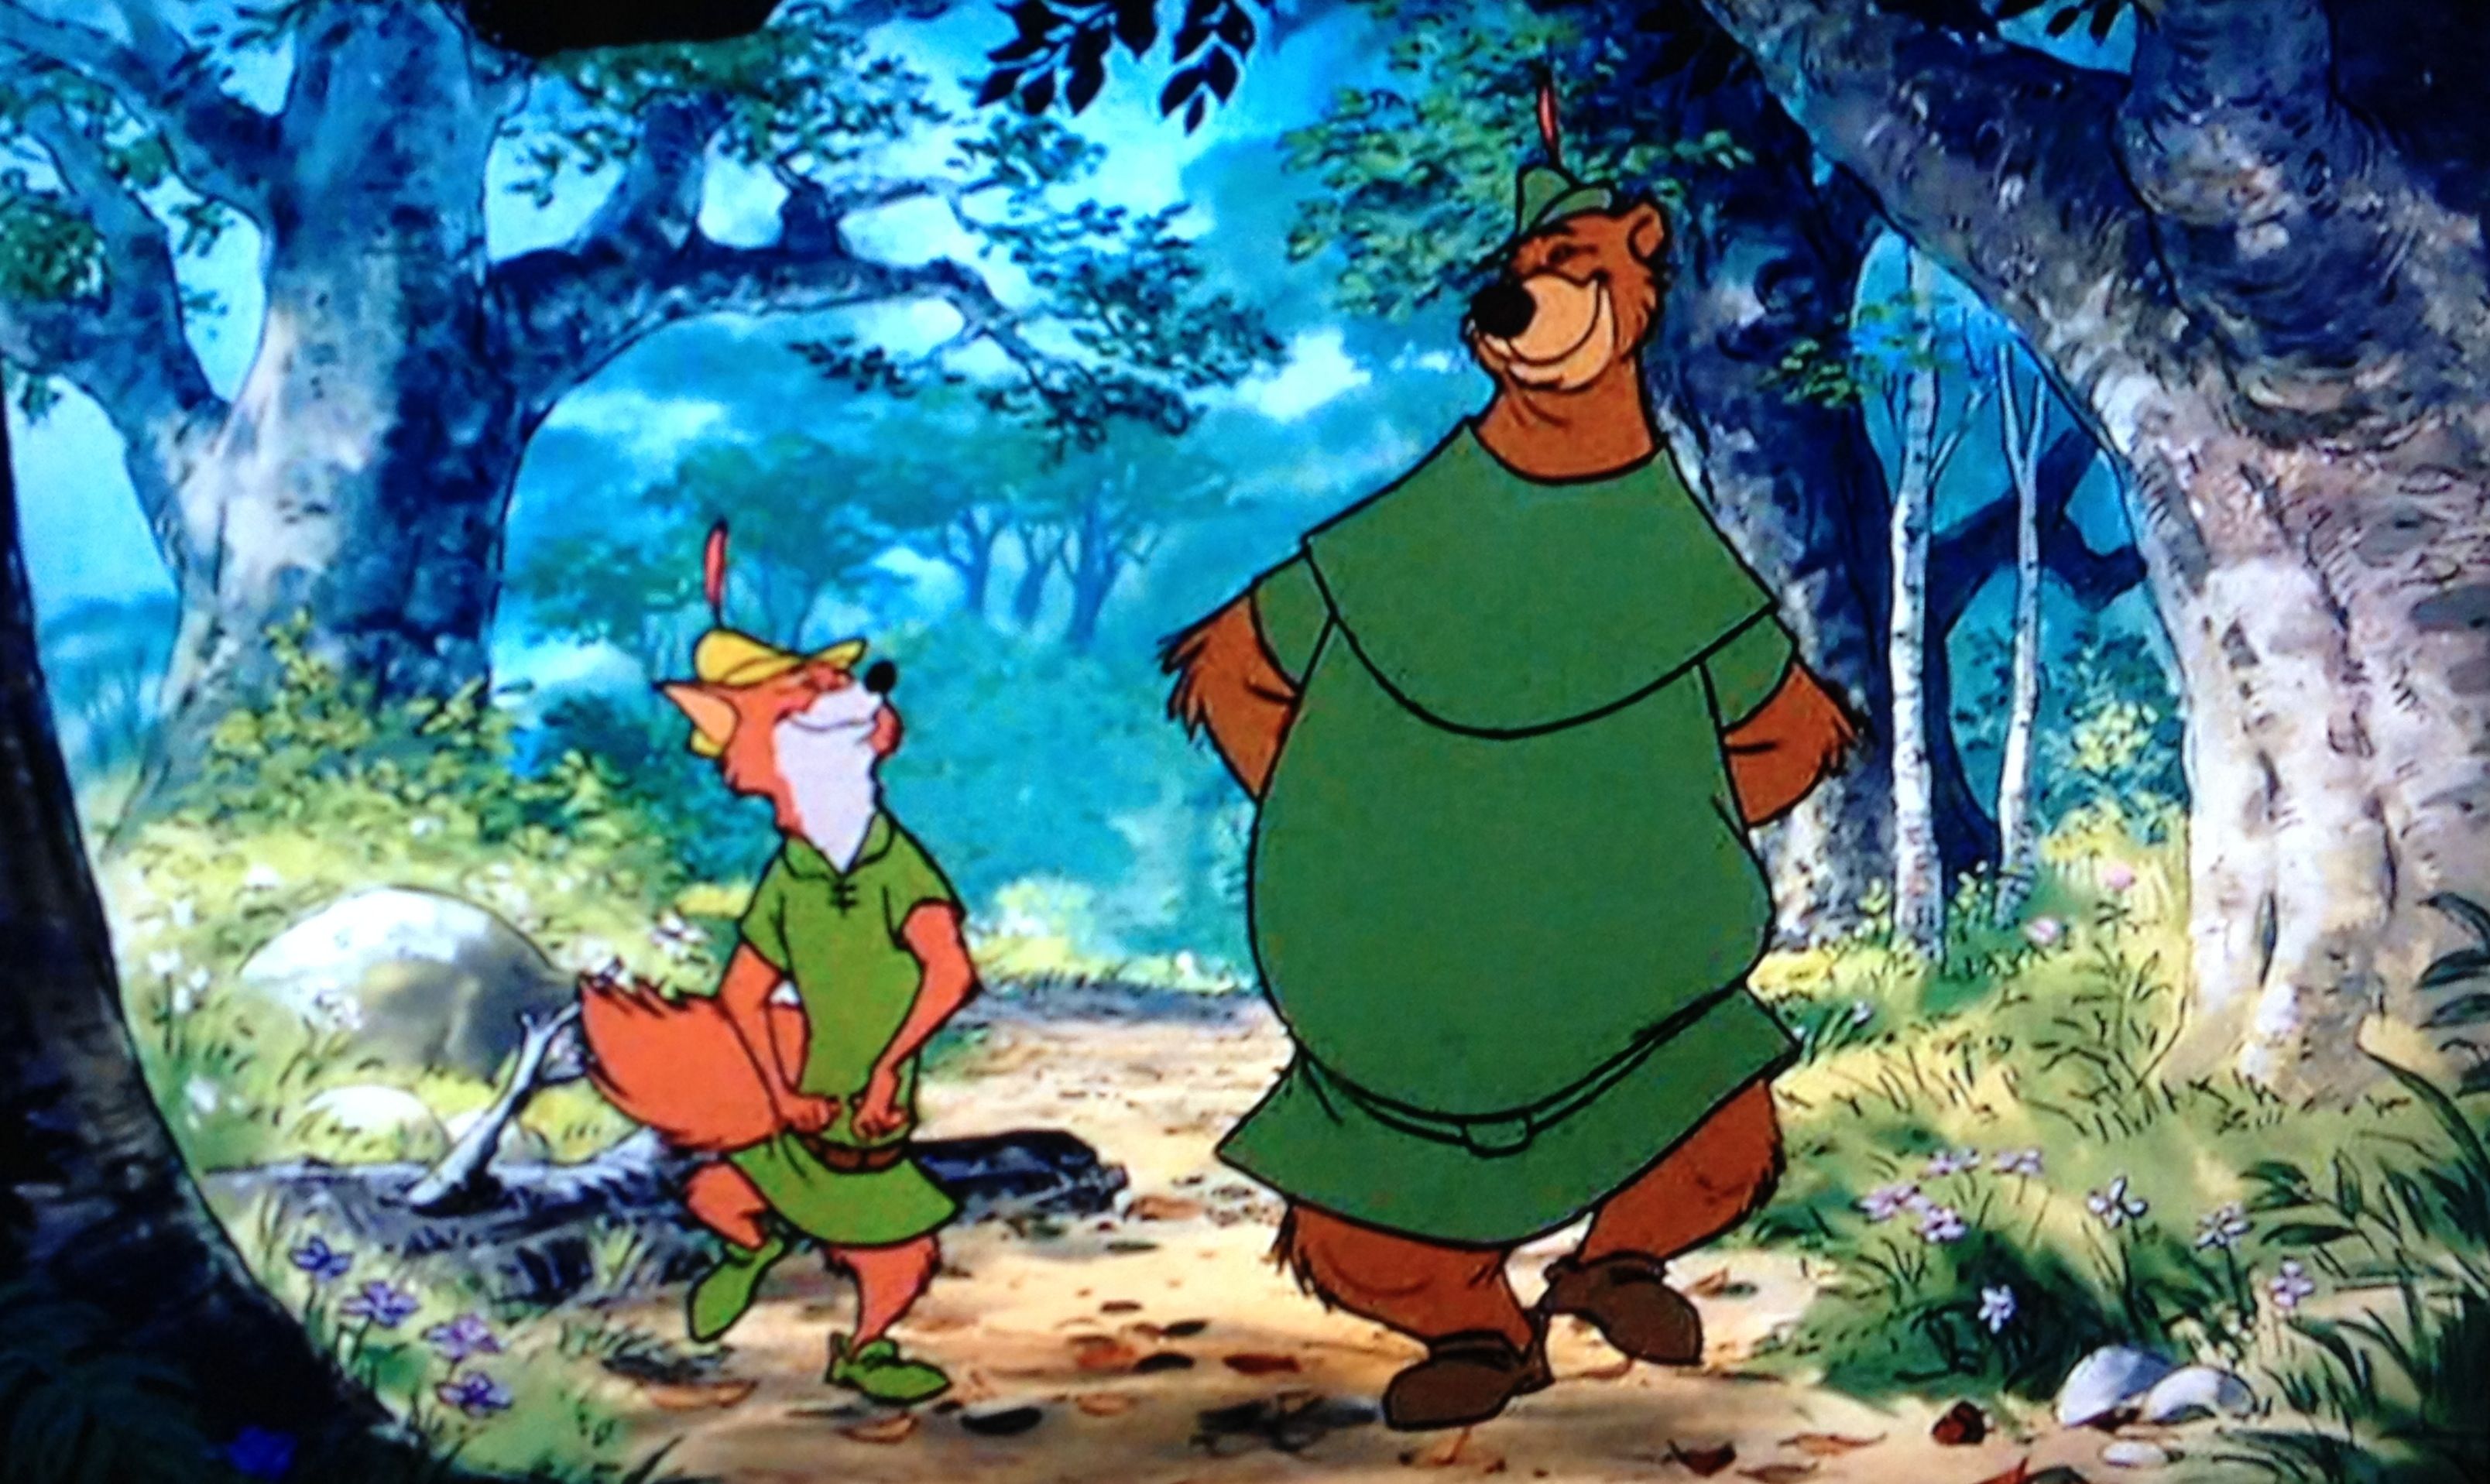 Robin Hood Movie Review. Second Star to the Right Disney Blog